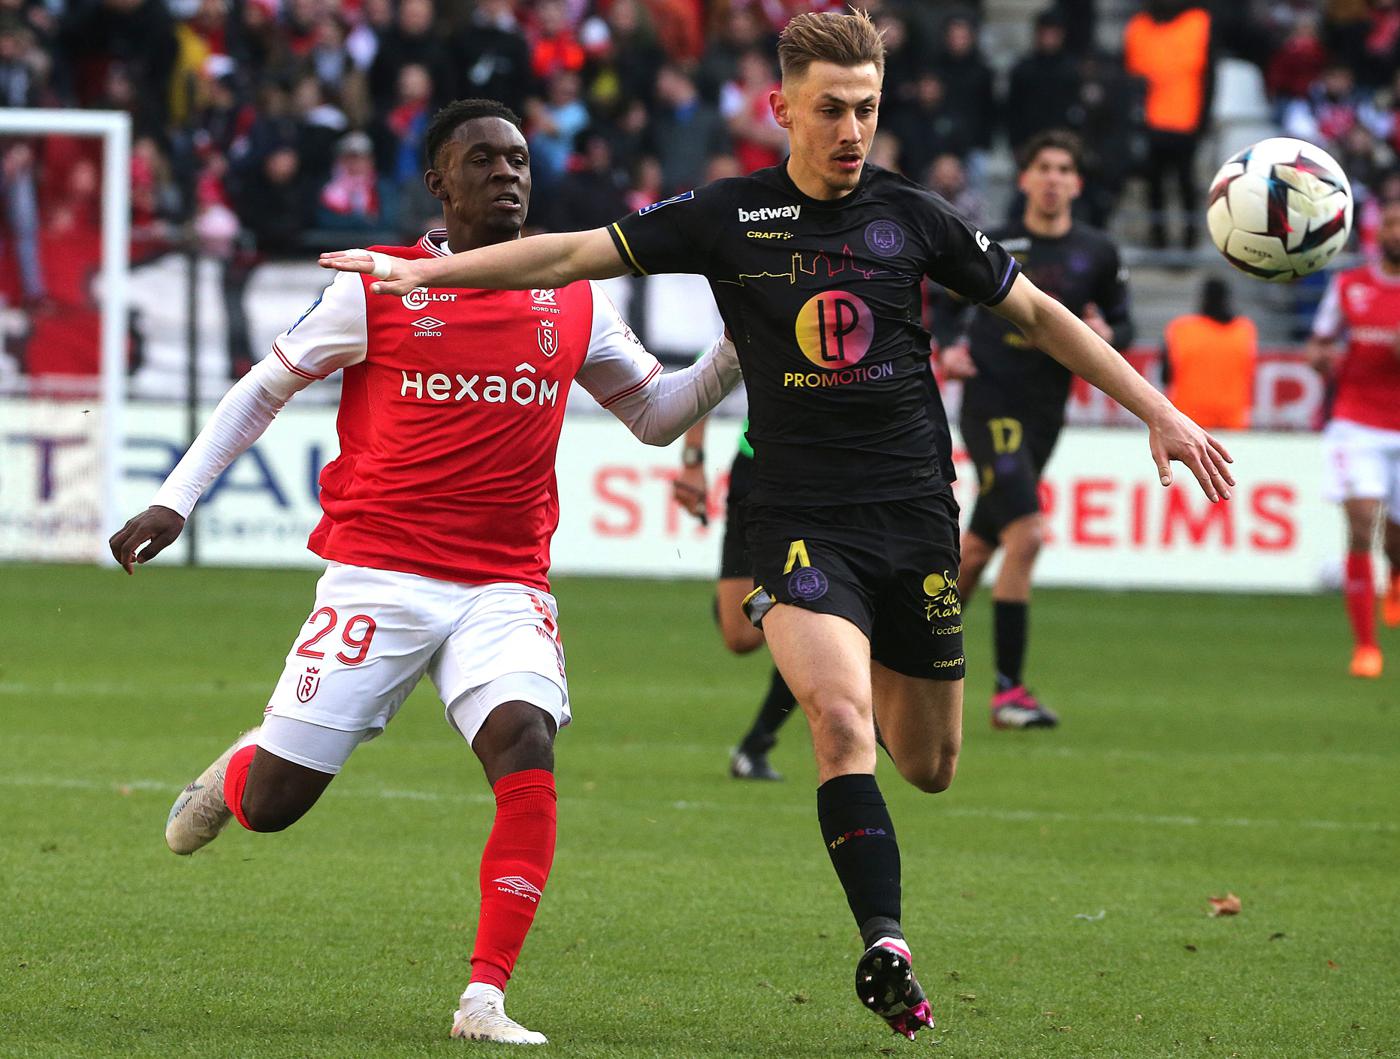 Reims - Toulouse - 3:0. French Premier League, 25th round. Match review, statistics.